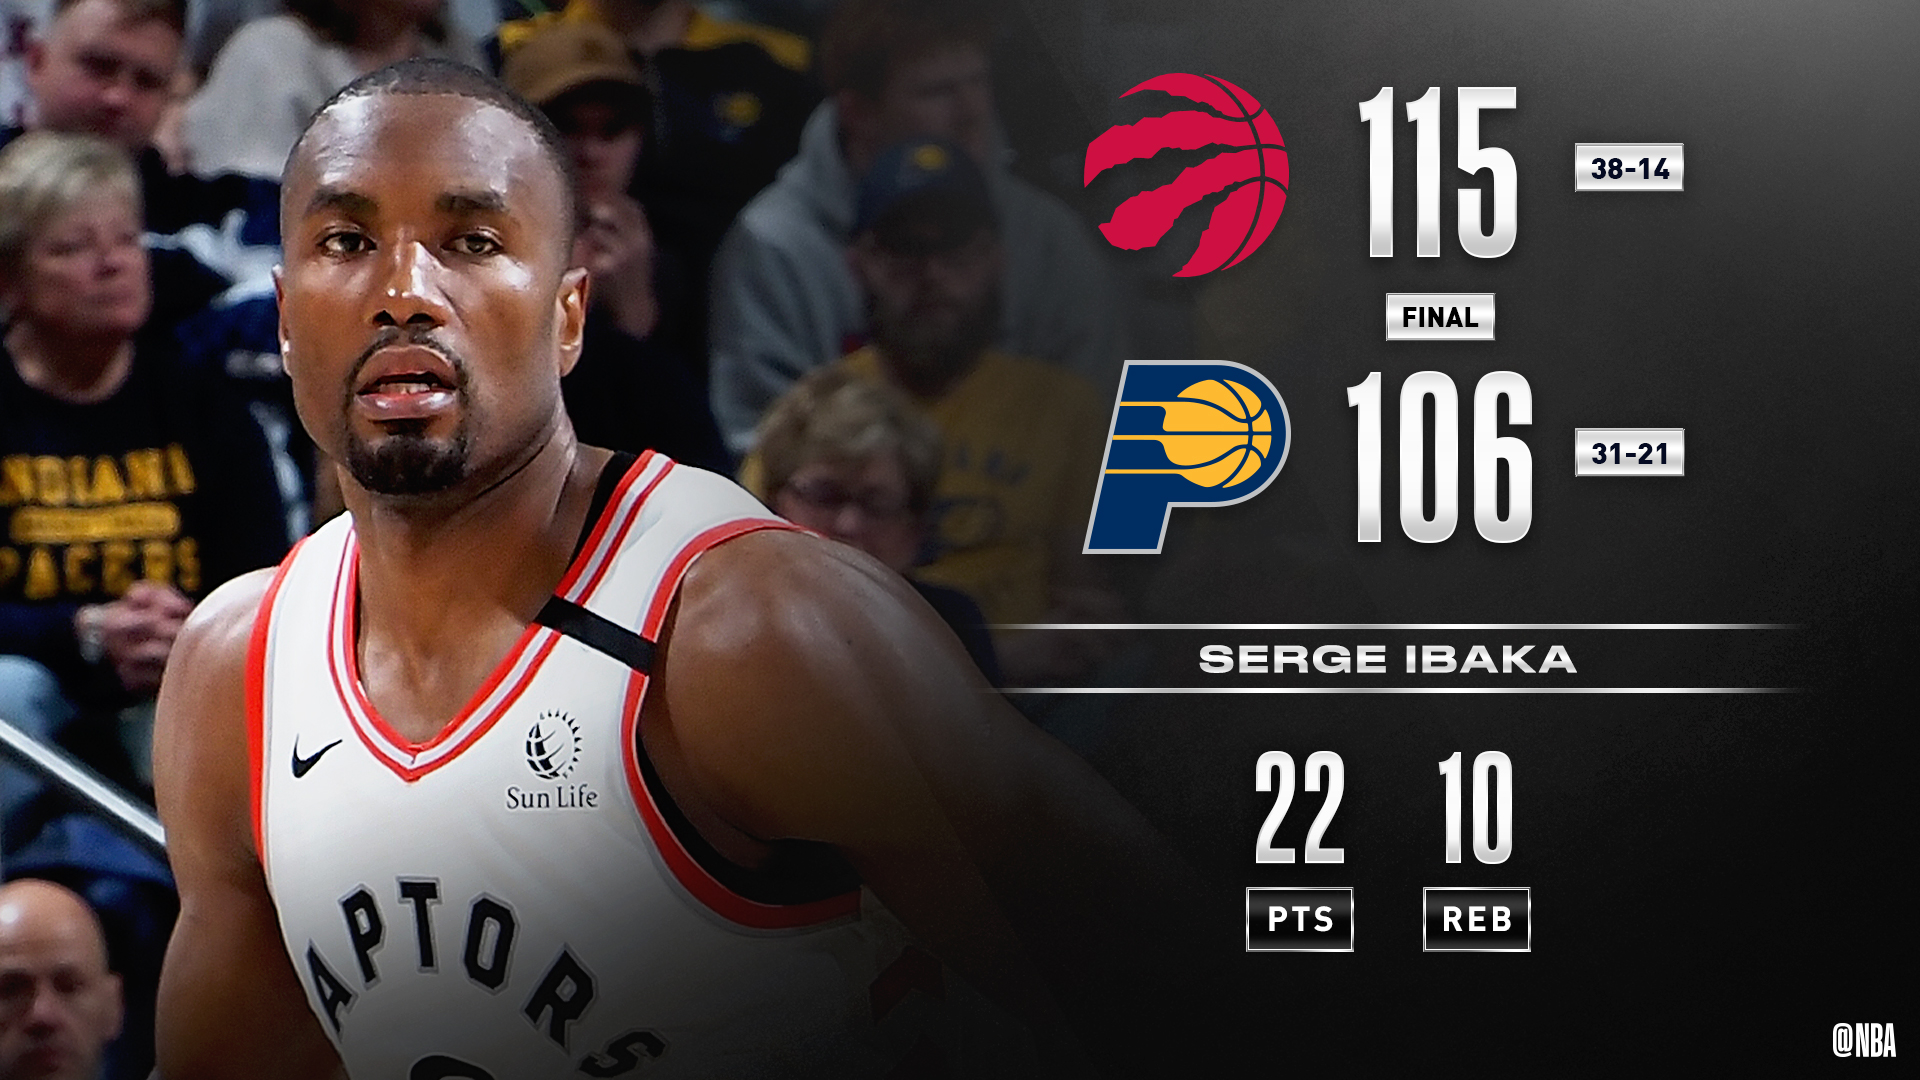 23. Serge Ibaka (22 PTS, 10 REB) and the. extend their franchise-record win...